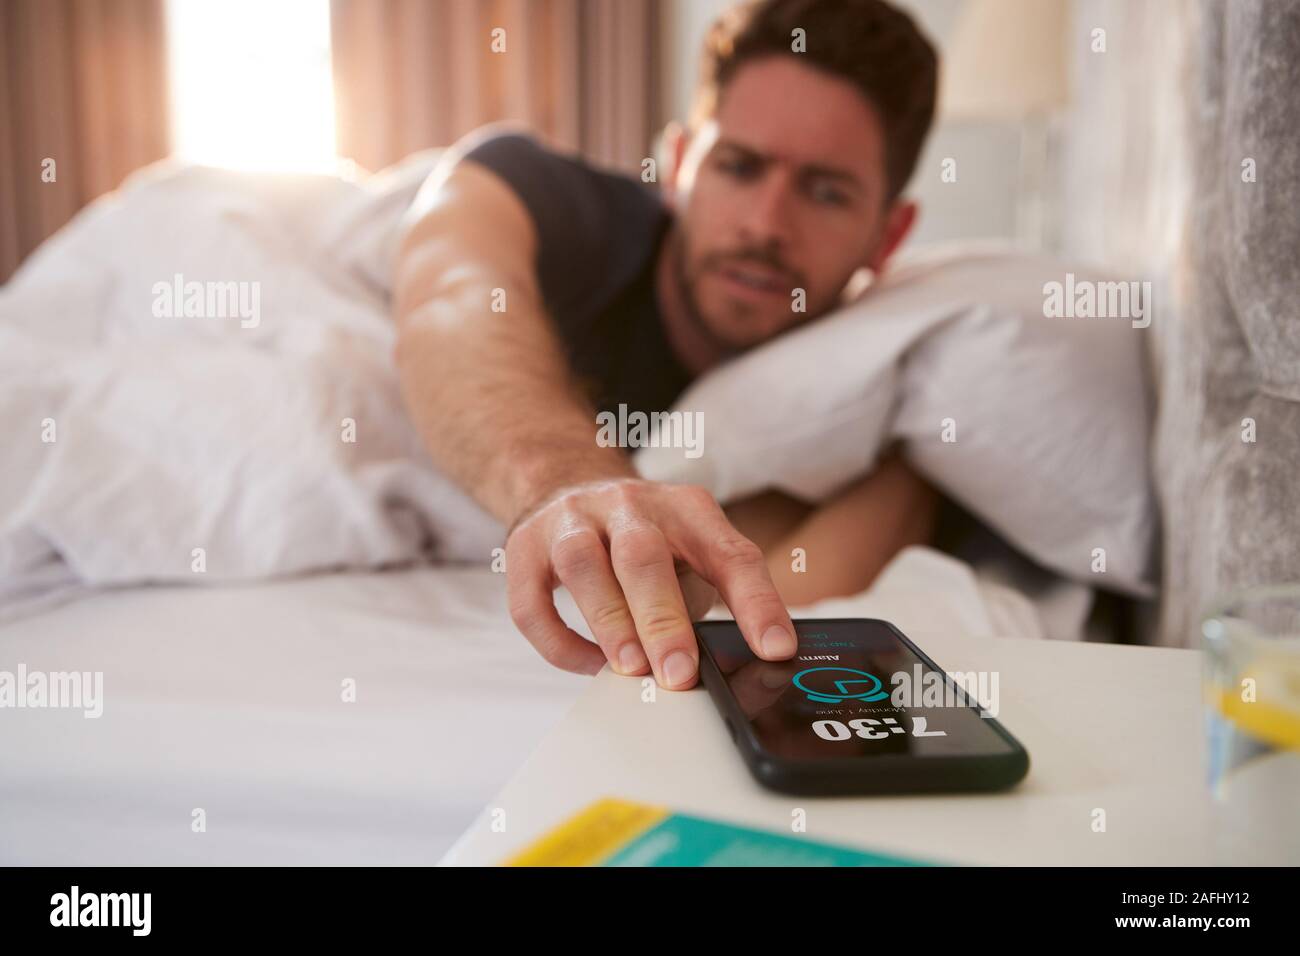 Man Waking Up In Bed Reaches Out To Turn Off Alarm On Mobile Phone Stock Photo